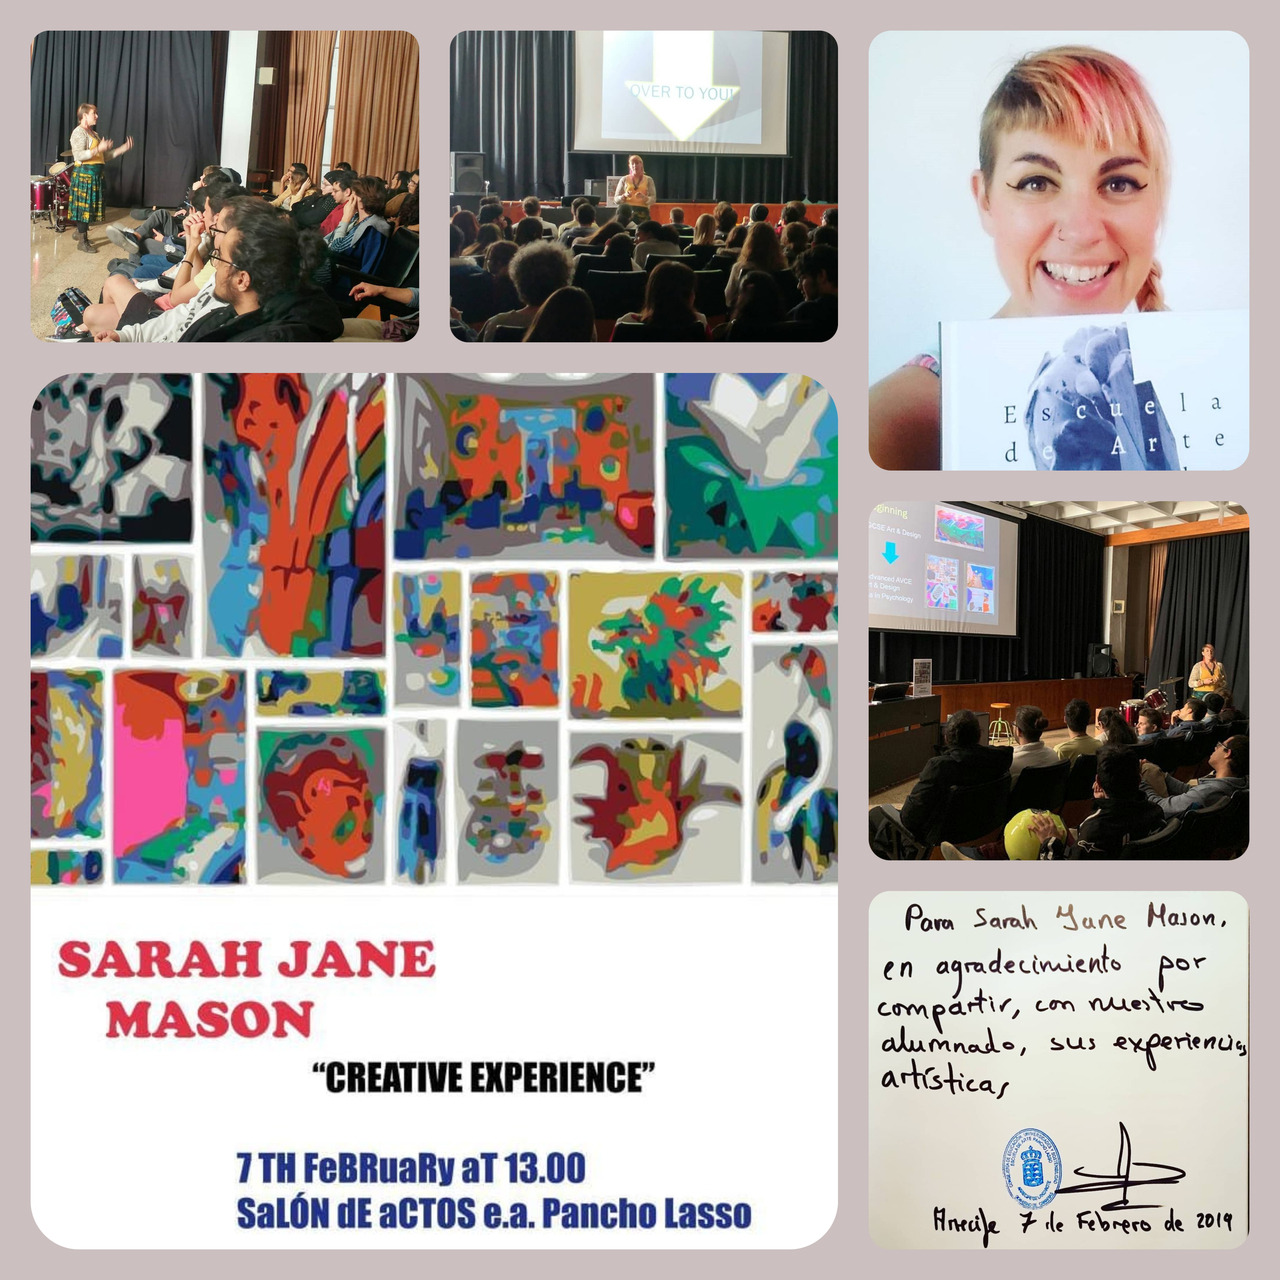 <h2>Creative Experience - presentation at Escuela de Arte Pancho Lasso  </h2><p>Over the past few weeks <a href="https://t.umblr.com/redirect?z=http%3A%2F%2Fsarahjanemason.com&t=ZWJjMzU0ZGVmMTA1NDJlYTdkNGI0MDZhZDAyY2QxMmRmZThlMzNiMCxnM2pOc1B4aw%3D%3D&b=t%3AKRR4Ot1tAaq9VthTWRX8Gg&p=https%3A%2F%2Fthelacunastudios.tumblr.com%2Fpost%2F182790072571%2Fcreative-experience-at-escuela-de-arte-pancho&m=1" target="_blank">Sarah-Jane</a> has been in touch with the fabulous team at <a href="https://t.umblr.com/redirect?z=http%3A%2F%2Fpancholasso.com%2F&t=Y2YyZDA5MTg4YTQyODE0ZjkwOWMzM2IwZTZkMDQxODAxNzFjYWRlYyxnM2pOc1B4aw%3D%3D&b=t%3AKRR4Ot1tAaq9VthTWRX8Gg&p=https%3A%2F%2Fthelacunastudios.tumblr.com%2Fpost%2F182790072571%2Fcreative-experience-at-escuela-de-arte-pancho&m=1" target="_blank">Escuela de Arte Pancho Lasso</a>, the Lanzarote School of Art. The discussions between them led to Sarah-Jane delivering a presentation to many of their students, lecturers and alumni last week.</p><p>The presentation topic was about Sarah-Jane’s ‘Creative Experience’ to-date, and her artistic journey so far. It also provided an opportunity to talk about The Lacuna Studios and what we intend to bring to the island. </p><p>Sarah-Jane was introduced by Carmen Miranda a lecturer from the college. Sarah-Jane talked about her formal art education from GCSE through to her PGCE. The progression initially led to Sarah-Jane being a secondary school teacher in Leeds. However, after five years, she decided that this wasn’t the career choice that best suited her and she moved to Cyprus to undertake her Masters Degree with the support of artist and educator <a href="https://t.umblr.com/redirect?z=https%3A%2F%2Fen.wikipedia.org%2Fwiki%2FStass_Paraskos&t=MTMzOWI0ZjQ4MDdlMTg0NjFkNWU4OGFiZTYzYjE5MmZmOTRhMTg0YixnM2pOc1B4aw%3D%3D&b=t%3AKRR4Ot1tAaq9VthTWRX8Gg&p=https%3A%2F%2Fthelacunastudios.tumblr.com%2Fpost%2F182790072571%2Fcreative-experience-at-escuela-de-arte-pancho&m=1" target="_blank">Stass Paraskos</a> at the <a href="https://t.umblr.com/redirect?z=https%3A%2F%2Fwww.artcyprus.co%2F&t=N2E0N2JjMzQzZDgyZTQ5OGE2NmM5ZWYwYTg1MDlmZjYxNzg3Njg1ZSxnM2pOc1B4aw%3D%3D&b=t%3AKRR4Ot1tAaq9VthTWRX8Gg&p=https%3A%2F%2Fthelacunastudios.tumblr.com%2Fpost%2F182790072571%2Fcreative-experience-at-escuela-de-arte-pancho&m=1" target="_blank">Cyprus College of Art</a>. Stass had a huge influence on not only her art but also on her vision of her career and indeed her whole life for the future. </p><p>Sarah-Jane returned from Cyprus and set up as an Artist Educator, working creatively in many varied locations. Some examples are <a href="https://t.umblr.com/redirect?z=https%3A%2F%2Fwww.thetetley.org%2F&t=NzczNmU5ZjdmMTJmNWYzOTdhYzNlNmZkN2VlYjUyYWU5Nzk4ZjgzYixnM2pOc1B4aw%3D%3D&b=t%3AKRR4Ot1tAaq9VthTWRX8Gg&p=https%3A%2F%2Fthelacunastudios.tumblr.com%2Fpost%2F182790072571%2Fcreative-experience-at-escuela-de-arte-pancho&m=1" target="_blank">The Tetley Art Gallery</a>, <a href="https://t.umblr.com/redirect?z=https%3A%2F%2Fwww.leeds.gov.uk%2Fmuseumsandgalleries%2FHome&t=ODI4MTkzYWQ1MGM0OTAxMjBjMzNkYzVjNjIzNTg1N2M0YTVhNDkyNCxnM2pOc1B4aw%3D%3D&b=t%3AKRR4Ot1tAaq9VthTWRX8Gg&p=https%3A%2F%2Fthelacunastudios.tumblr.com%2Fpost%2F182790072571%2Fcreative-experience-at-escuela-de-arte-pancho&m=1" target="_blank">Leeds Museums</a>, <a href="https://t.umblr.com/redirect?z=http%3A%2F%2Fwww.cannon-hall.com&t=N2JmZmYzNDBjYjRlMmJjMzJmNGY1OGNhZDU3NzAxNjA2NGYxMDM5YixnM2pOc1B4aw%3D%3D&b=t%3AKRR4Ot1tAaq9VthTWRX8Gg&p=https%3A%2F%2Fthelacunastudios.tumblr.com%2Fpost%2F182790072571%2Fcreative-experience-at-escuela-de-arte-pancho&m=1" target="_blank">Cannon Hall Museum Park and Gardens</a>, <a href="https://t.umblr.com/redirect?z=https%3A%2F%2Fwww.artscouncil.org.uk%2F&t=YTc5N2Q1ZDE1MmE0ZDQ2ZWIwMzFkMTc3OTI2ZDM0YTE1MTk2NzVkNixnM2pOc1B4aw%3D%3D&b=t%3AKRR4Ot1tAaq9VthTWRX8Gg&p=https%3A%2F%2Fthelacunastudios.tumblr.com%2Fpost%2F182790072571%2Fcreative-experience-at-escuela-de-arte-pancho&m=1" target="_blank">Arts Council England</a>, <a href="https://t.umblr.com/redirect?z=https%3A%2F%2Fwww.artscouncilcollection.org.uk%2F&t=ZGUwZWFkZWNmMzM0NTZlN2UxZWI1NjdmYzhiM2ExNmZiMjZlY2FkOCxnM2pOc1B4aw%3D%3D&b=t%3AKRR4Ot1tAaq9VthTWRX8Gg&p=https%3A%2F%2Fthelacunastudios.tumblr.com%2Fpost%2F182790072571%2Fcreative-experience-at-escuela-de-arte-pancho&m=1" target="_blank">The Arts Council Collection</a>, <a href="https://t.umblr.com/redirect?z=https%3A%2F%2Fwww.artsedarchive.org.uk%2F&t=ZDUxYmQxOTQzYjliOTZjZDQ5MDUyMTQ3YTgxNWRlNGU5NGM1YTM1ZixnM2pOc1B4aw%3D%3D&b=t%3AKRR4Ot1tAaq9VthTWRX8Gg&p=https%3A%2F%2Fthelacunastudios.tumblr.com%2Fpost%2F182790072571%2Fcreative-experience-at-escuela-de-arte-pancho&m=1" target="_blank">The National Arts Education Archive</a>, <a href="https://t.umblr.com/redirect?z=https%3A%2F%2Fmarksintime.marksandspencer.com%2Fhome&t=YTQxMTRjZGVhYTRmYzc1NmVmM2ViMTdiZjVlMTI3OWFiODlmMGU5YixnM2pOc1B4aw%3D%3D&b=t%3AKRR4Ot1tAaq9VthTWRX8Gg&p=https%3A%2F%2Fthelacunastudios.tumblr.com%2Fpost%2F182790072571%2Fcreative-experience-at-escuela-de-arte-pancho&m=1" target="_blank">The Marks and Spencer Archive</a> and National Portfolio Galleries such as the <a href="https://t.umblr.com/redirect?z=https%3A%2F%2Fysp.org.uk%2F&t=MGY0YTI2ZmY5OTllMzZlN2I4M2RiYjA1YWI0NDA0MWZhMmM1ZTY4NyxnM2pOc1B4aw%3D%3D&b=t%3AKRR4Ot1tAaq9VthTWRX8Gg&p=https%3A%2F%2Fthelacunastudios.tumblr.com%2Fpost%2F182790072571%2Fcreative-experience-at-escuela-de-arte-pancho&m=1" target="_blank">Yorkshire Sculpture Park</a>. Sarah-Jane has developed her own publishing house <a href="https://t.umblr.com/redirect?z=http%3A%2F%2Fnextgenerationpublications.com%2F&t=ZGZhY2JhYjkyMGEzZmQzNDA4NWE0N2I1NWU4YjgxN2RlZWVmNWZiMCxnM2pOc1B4aw%3D%3D&b=t%3AKRR4Ot1tAaq9VthTWRX8Gg&p=https%3A%2F%2Fthelacunastudios.tumblr.com%2Fpost%2F182790072571%2Fcreative-experience-at-escuela-de-arte-pancho&m=1" target="_blank">Next Generation Publications</a> which has been able to publish a number of books created by participating children and relating to projects she has delivered over a number of years (these books are now available from the <a href="https://t.umblr.com/redirect?z=https%3A%2F%2Fwww.bl.uk%2F&t=ZWU5MTc3M2Y2ZDMwN2NkYzM5OWNhYzgyNmMxYjZhYjg1MDc5ZGNiMSxnM2pOc1B4aw%3D%3D&b=t%3AKRR4Ot1tAaq9VthTWRX8Gg&p=https%3A%2F%2Fthelacunastudios.tumblr.com%2Fpost%2F182790072571%2Fcreative-experience-at-escuela-de-arte-pancho&m=1" target="_blank">British Library</a>).</p><p>The final section of Sarah-Jane’s talk explained about how her past experiences and teachings from Stass have led to the creation of <a href="https://t.umblr.com/redirect?z=http%3A%2F%2Fthelacunastudios.com&t=YTNhOWYxNGJmZGVjMGU3YjdmNDc1Mzc5NTRlNDliNTc1YmU4ZDEwMSxnM2pOc1B4aw%3D%3D&b=t%3AKRR4Ot1tAaq9VthTWRX8Gg&p=https%3A%2F%2Fthelacunastudios.tumblr.com%2Fpost%2F182790072571%2Fcreative-experience-at-escuela-de-arte-pancho&m=1" target="_blank">The Lacuna Studios</a>. She explained that how, along with <a href="https://t.umblr.com/redirect?z=http%3A%2F%2Finstagram.com%2Fsct73&t=NmViOTY0YjAxMTQyMDNlZWYzNmM3OWIwY2VjYjA2ODE1NTJlYmFhOSxnM2pOc1B4aw%3D%3D&b=t%3AKRR4Ot1tAaq9VthTWRX8Gg&p=https%3A%2F%2Fthelacunastudios.tumblr.com%2Fpost%2F182790072571%2Fcreative-experience-at-escuela-de-arte-pancho&m=1" target="_blank">Simon Turner</a>, they aim to create residential art studios on the island of Lanzarote to provide facilities for both local and international artists and art students to learn and create in relaxed surroundings with no obligations.</p><p>Sarah-Jane talked about her experiences with other influential artists and her involvement with The Frozen Academy, an arts collective headed by <a href="https://t.umblr.com/redirect?z=https%3A%2F%2Fwww.artlist.cz%2Fjosef-danek-5002%2F&t=OGVmODEwMWFhZTQxYmFlMjc0NzFmNGYzOGZmNDc4MzU5ODdmYWRlNixnM2pOc1B4aw%3D%3D&b=t%3AKRR4Ot1tAaq9VthTWRX8Gg&p=https%3A%2F%2Fthelacunastudios.tumblr.com%2Fpost%2F182790072571%2Fcreative-experience-at-escuela-de-arte-pancho&m=1" target="_blank">Josef Danek</a>.  She also spoke of her regular involvement in the <a href="https://t.umblr.com/redirect?z=http%3A%2F%2Fwww.galerielavieilleposte.org%2Fid27.html&t=MGExZjZiYmM2YjViNThiNmVhNjdkNDQyODg1ZGEwOWViZWQwYzI2OSxnM2pOc1B4aw%3D%3D&b=t%3AKRR4Ot1tAaq9VthTWRX8Gg&p=https%3A%2F%2Fthelacunastudios.tumblr.com%2Fpost%2F182790072571%2Fcreative-experience-at-escuela-de-arte-pancho&m=1" target="_blank">Larroque Arts Festival</a>, directed by Professor Kenneth G. Hay from the <a href="https://t.umblr.com/redirect?z=http%3A%2F%2Fwww.galerielavieilleposte.org%2Findex.html&t=ZTJjODdlMGRlOWQwNjI2YjA4NTRkNjFkNDRjODc3MzUzNzgwZTU2ZCxnM2pOc1B4aw%3D%3D&b=t%3AKRR4Ot1tAaq9VthTWRX8Gg&p=https%3A%2F%2Fthelacunastudios.tumblr.com%2Fpost%2F182790072571%2Fcreative-experience-at-escuela-de-arte-pancho&m=1" target="_blank">Gallerie la Vielle Poste</a> in Larroque. This is an international Arts Festival based in the rural village of Larroque in the South of France. The Lacuna Studios is proud to twin with for 2019 and deliver the Lanzarote Arts Festival at the end of July through to the beginning of August.</p><p>Sarah-Jane opened up the floor for questions from the audience with some very interested students keen to find out more about The Lacuna Studios, the Lanzarote Arts Festival and also about Sarah-Jane’s history.</p><p>The Escuela de Arte Pancho Lasso presented Sarah-Jane with a copy of the book telling the History of Escuela de Arte Pancho Lasso, to mark the occasion. The book is now a part of The Lacuna Studios Library which will be based at and accessible through the studios.</p><p>More details about the Lanzarote Arts Festival 2019 will be available shortly from <a href="http://thelacunastudios.com" target="_blank">The Lacuna Studios</a> website and <a href="http://facebook.com/thelacunastudios" target="_blank">facebook</a> page</p>